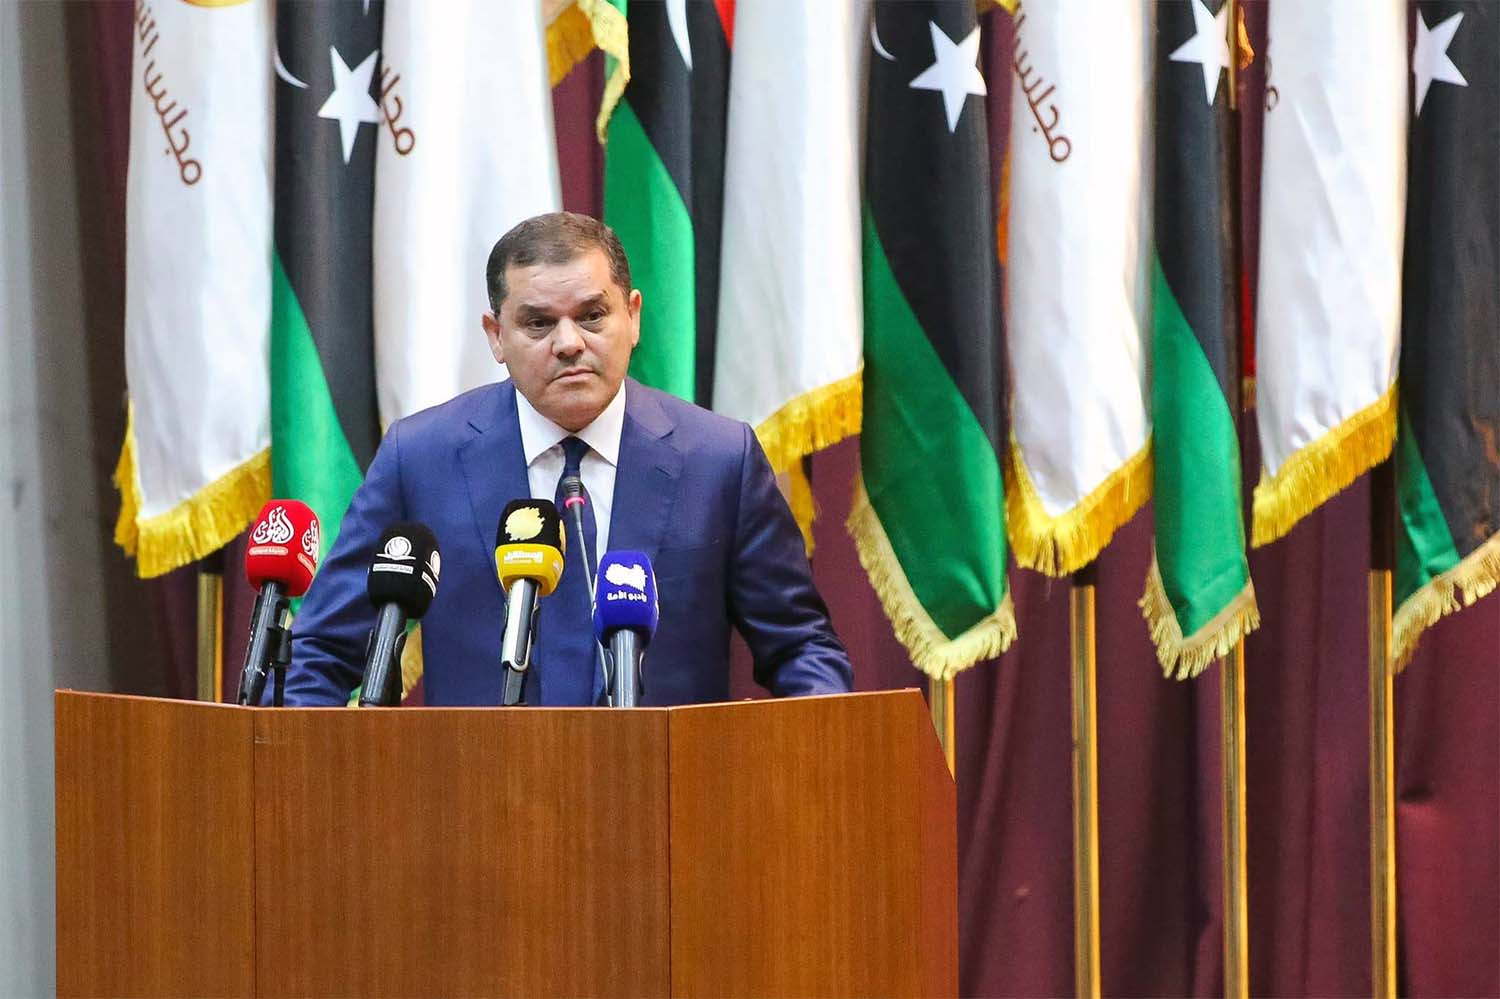 Dbeibah's Cabinet includes 33 ministers and two deputy prime ministers